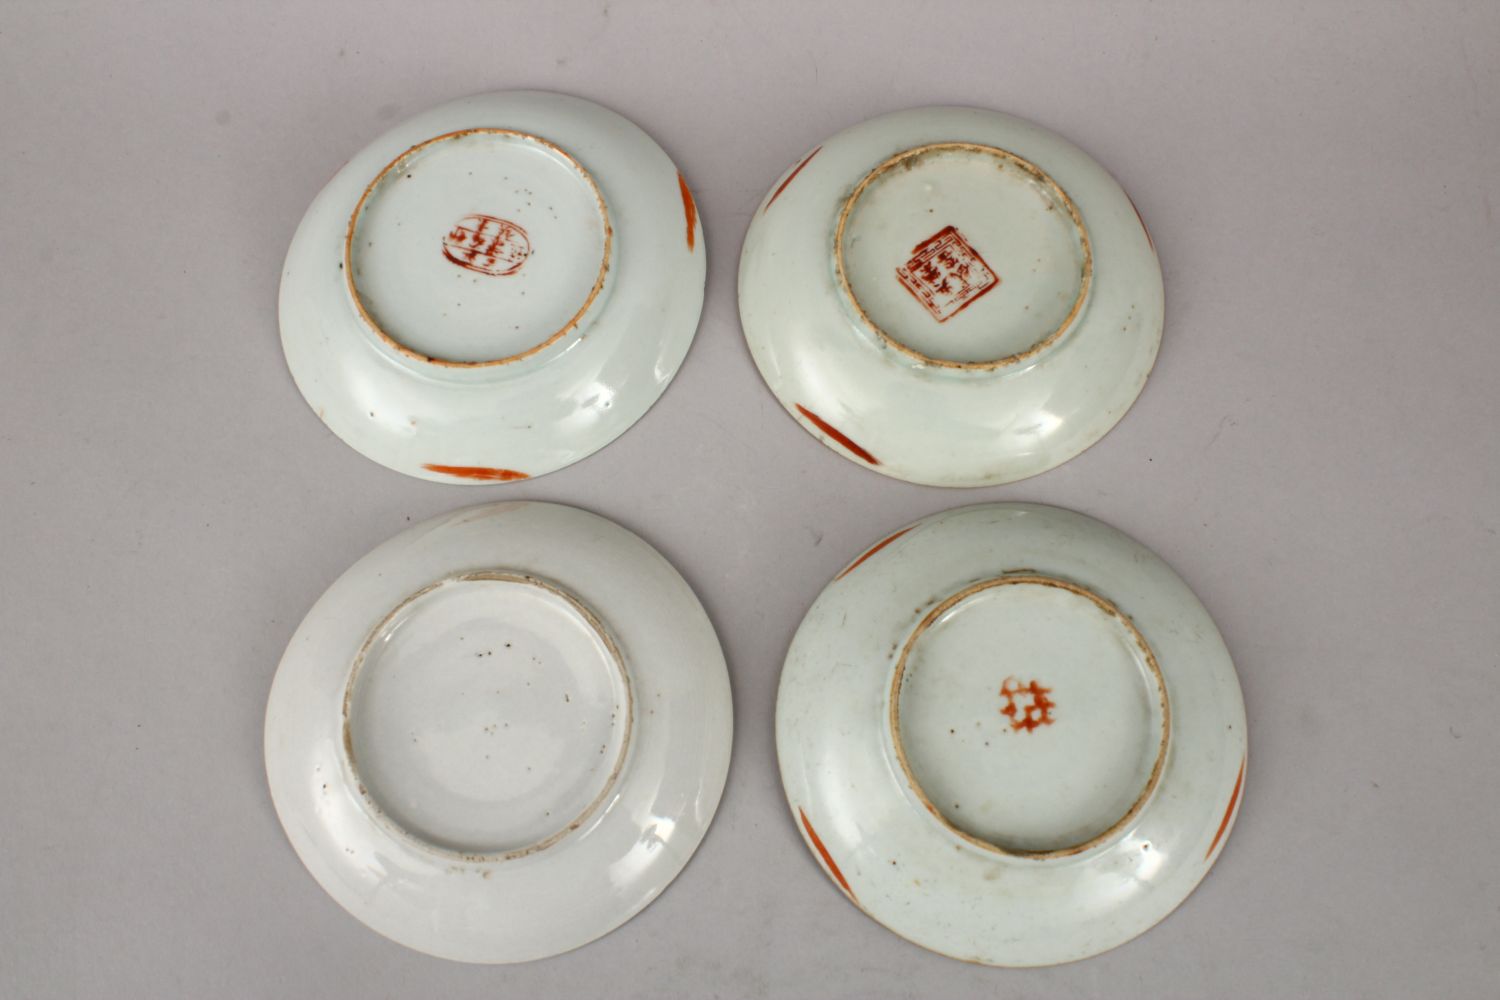 FOUR 19TH CENTURUY CHINESE IRON RED PORCELAIN PLATES, decorate with flora, fruits, bats and symbols, - Image 4 of 5